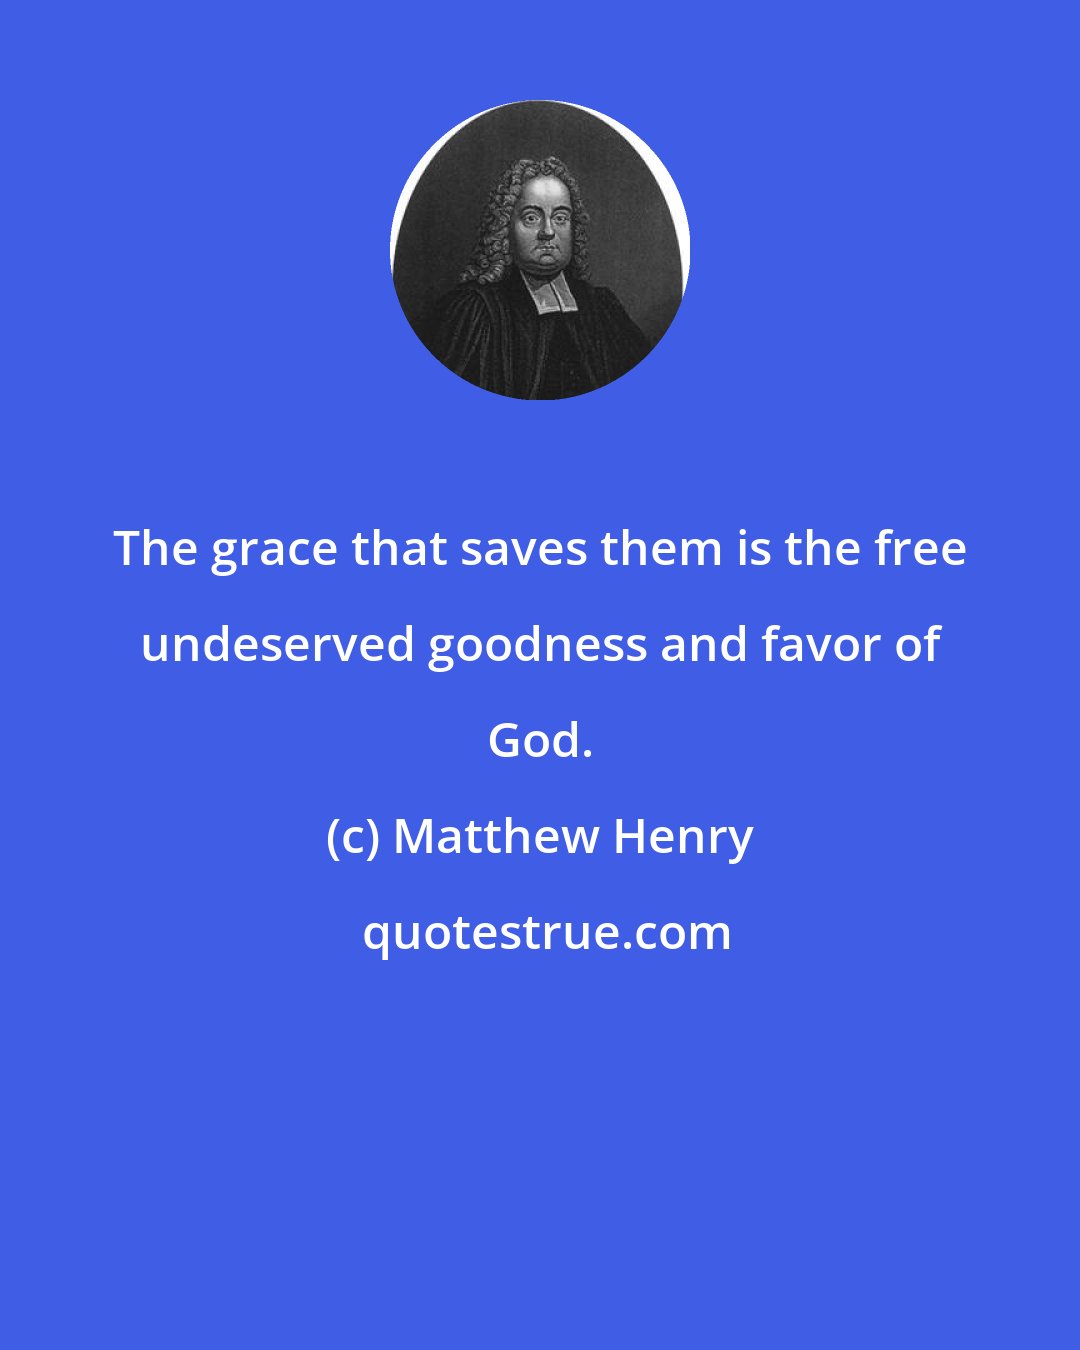 Matthew Henry: The grace that saves them is the free undeserved goodness and favor of God.